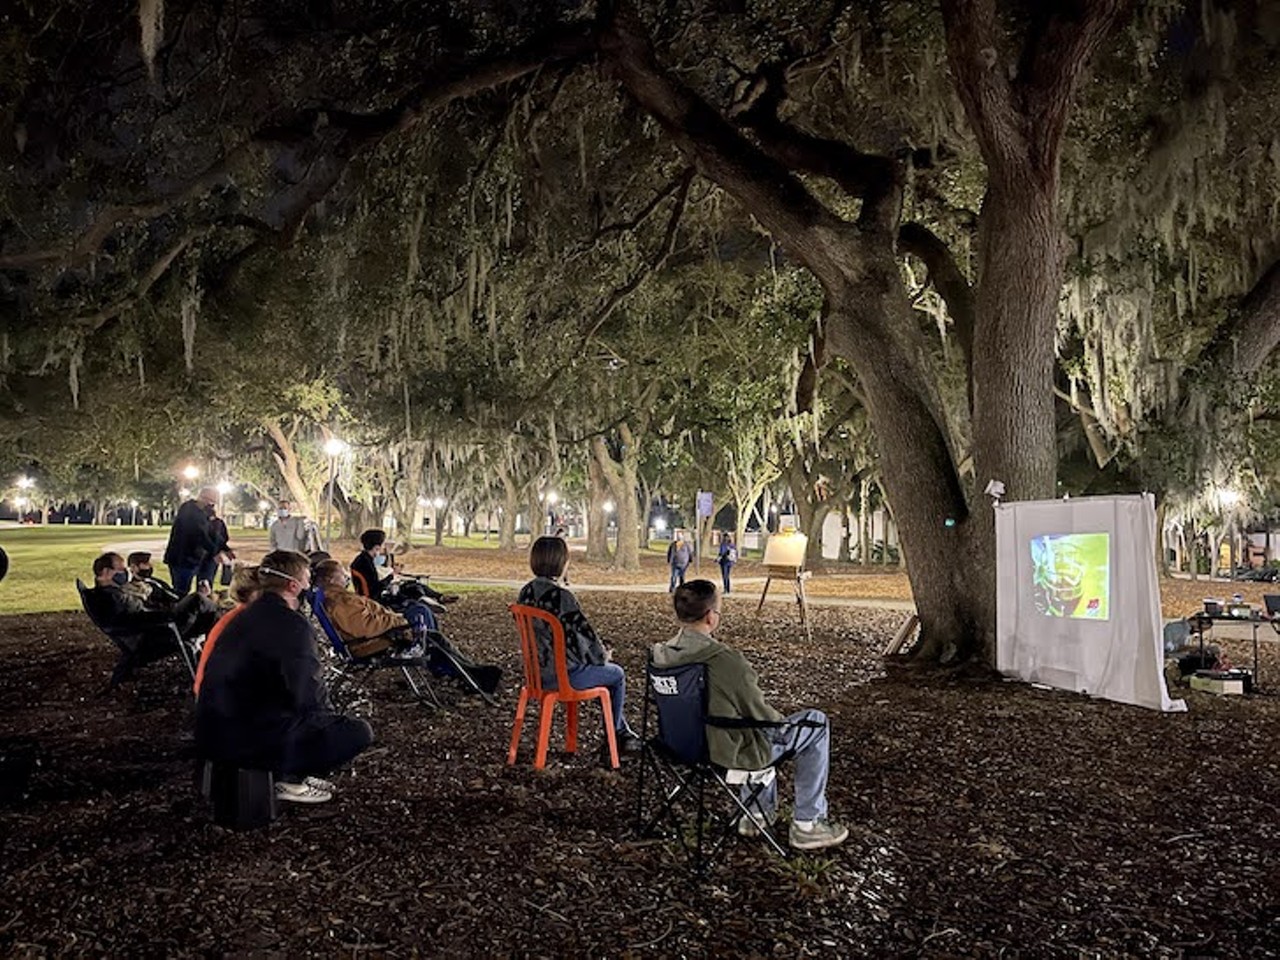 All the world &#151; or at least Loch Haven Park &#151; is a stage for the Orlando Fringe Winter Mini-Fest